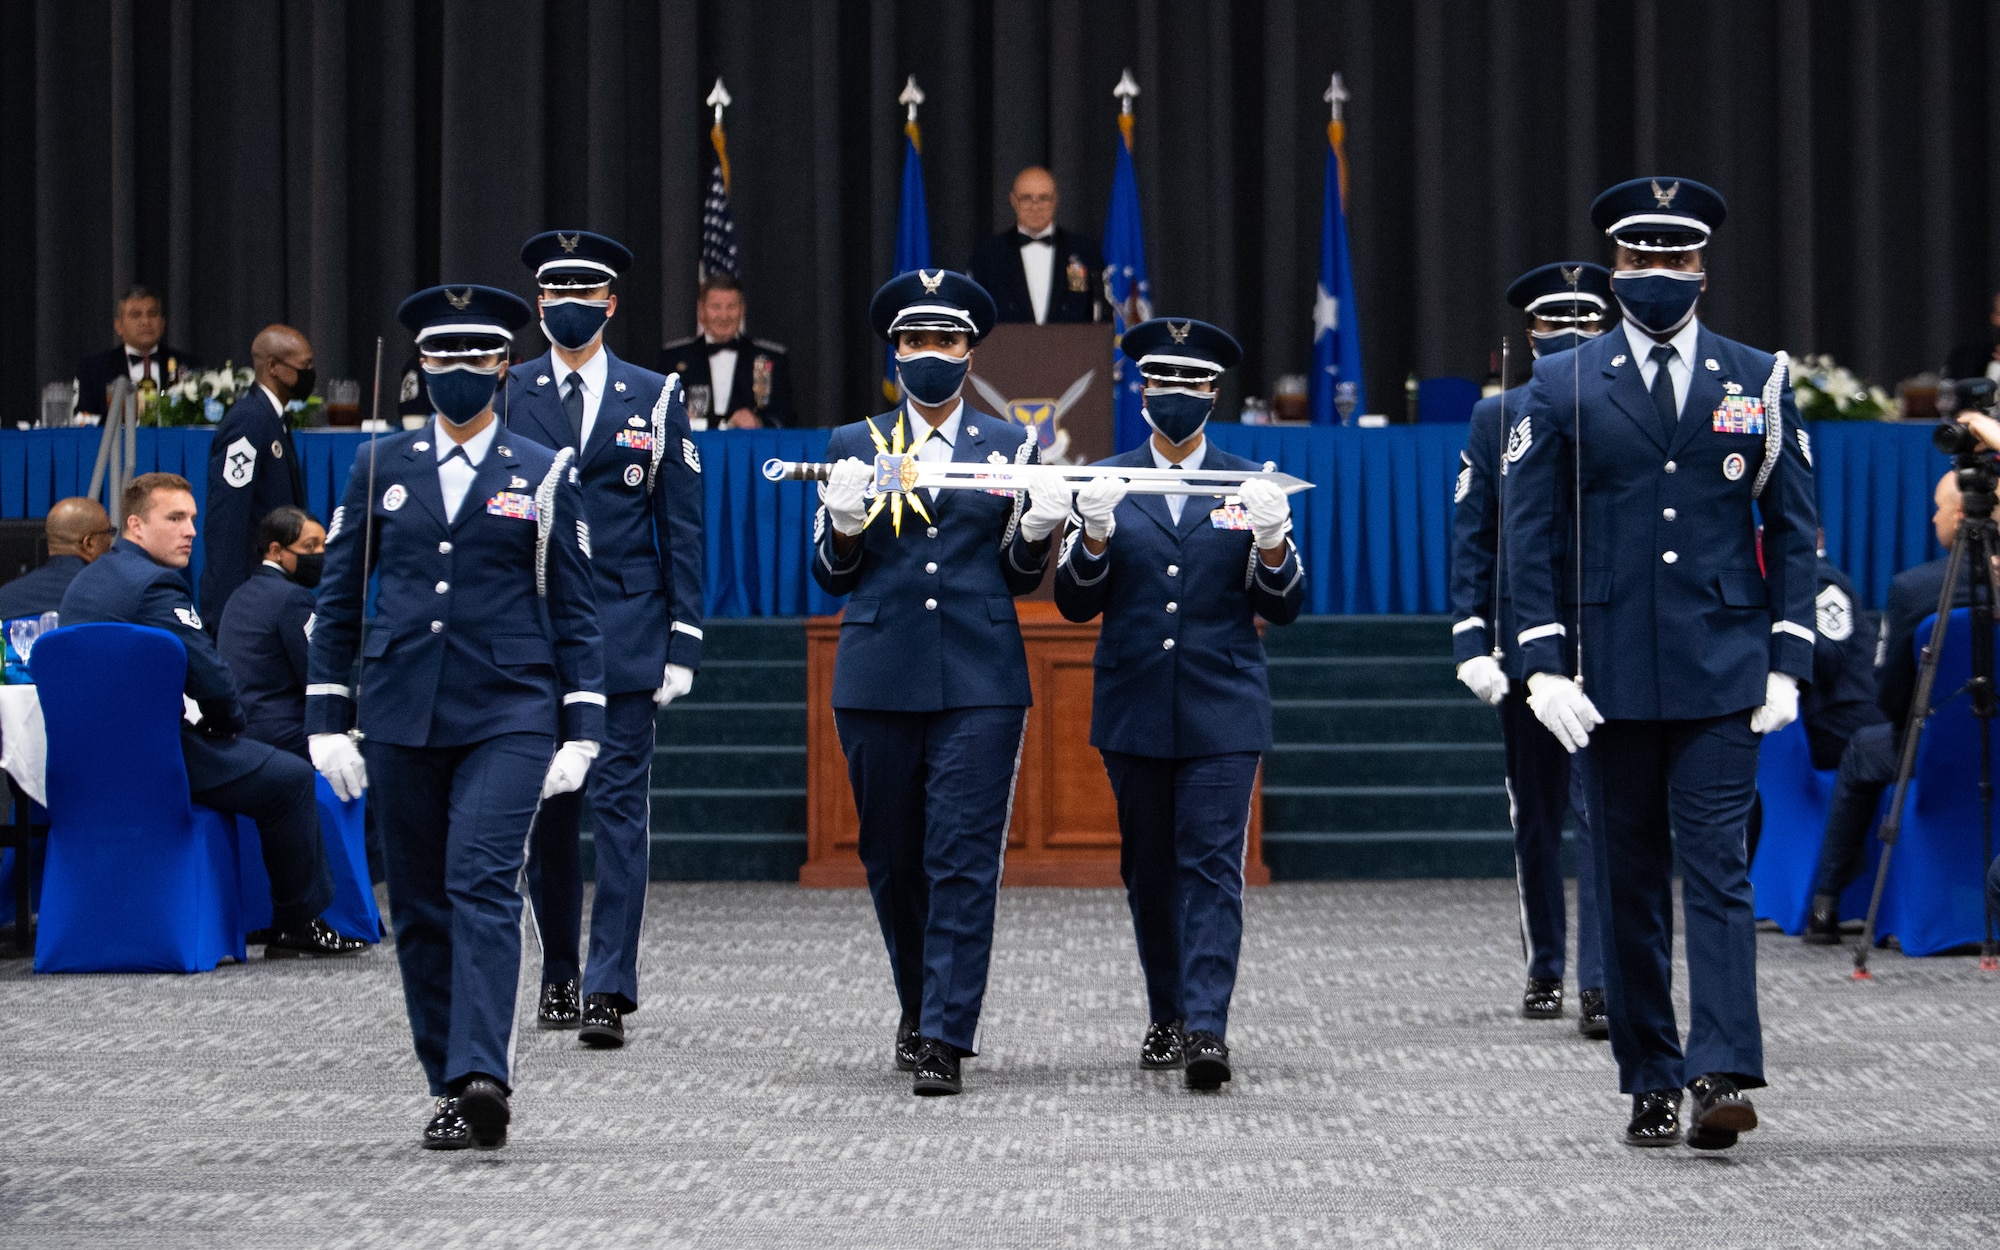 Barksdale's honor guard presents the ceremonious sword used in the Order of the Sword ceremony honoring retired Gen. Robin Rand, former Air Force Global Strike Command commander, at Barksdale Air Force Base, Louisiana, April 23, 2021. The ceremonial presentation was adopted from the Royal Order of the Sword and passed to the United States during the Revolutionary War. However, it lay dormant until it was reinstituted in its current form in 1967. (U.S. Air Force photo by Airman 1st Class Jacob B. Wrightsman)